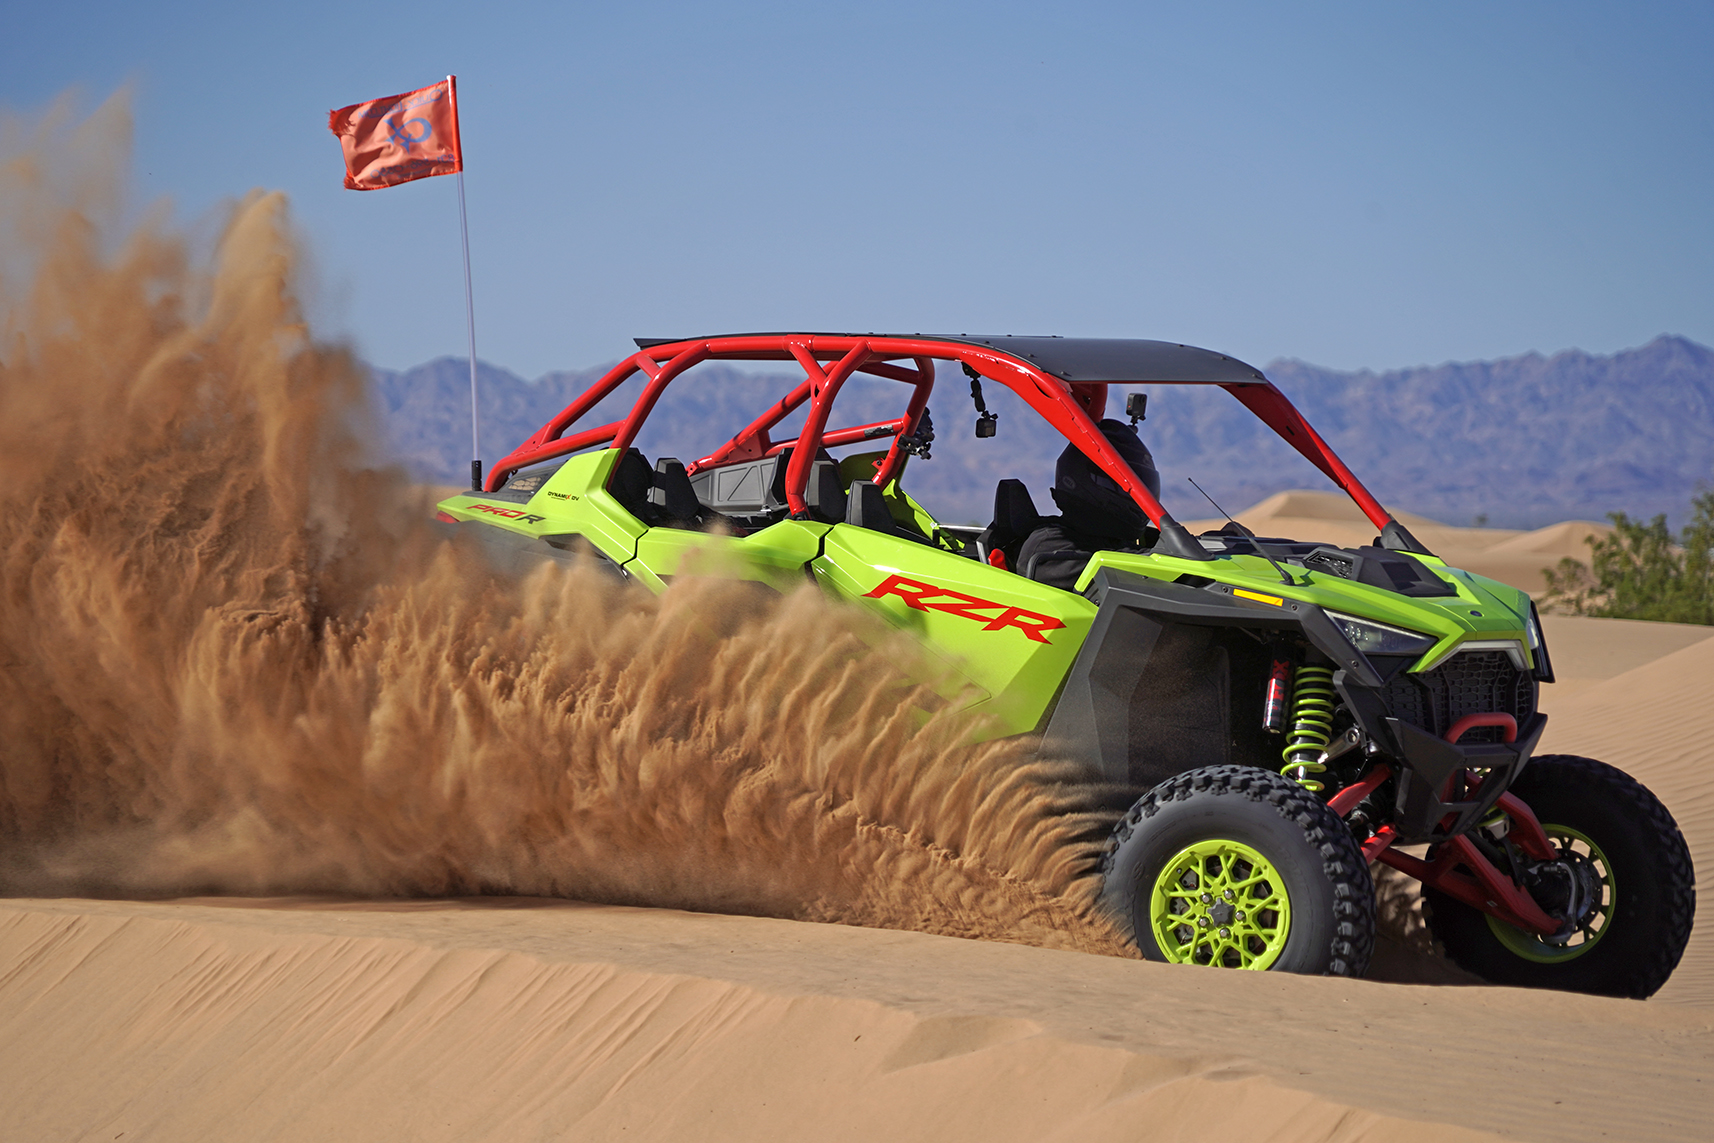 2022 Polaris RZR Pro R First Drive Review